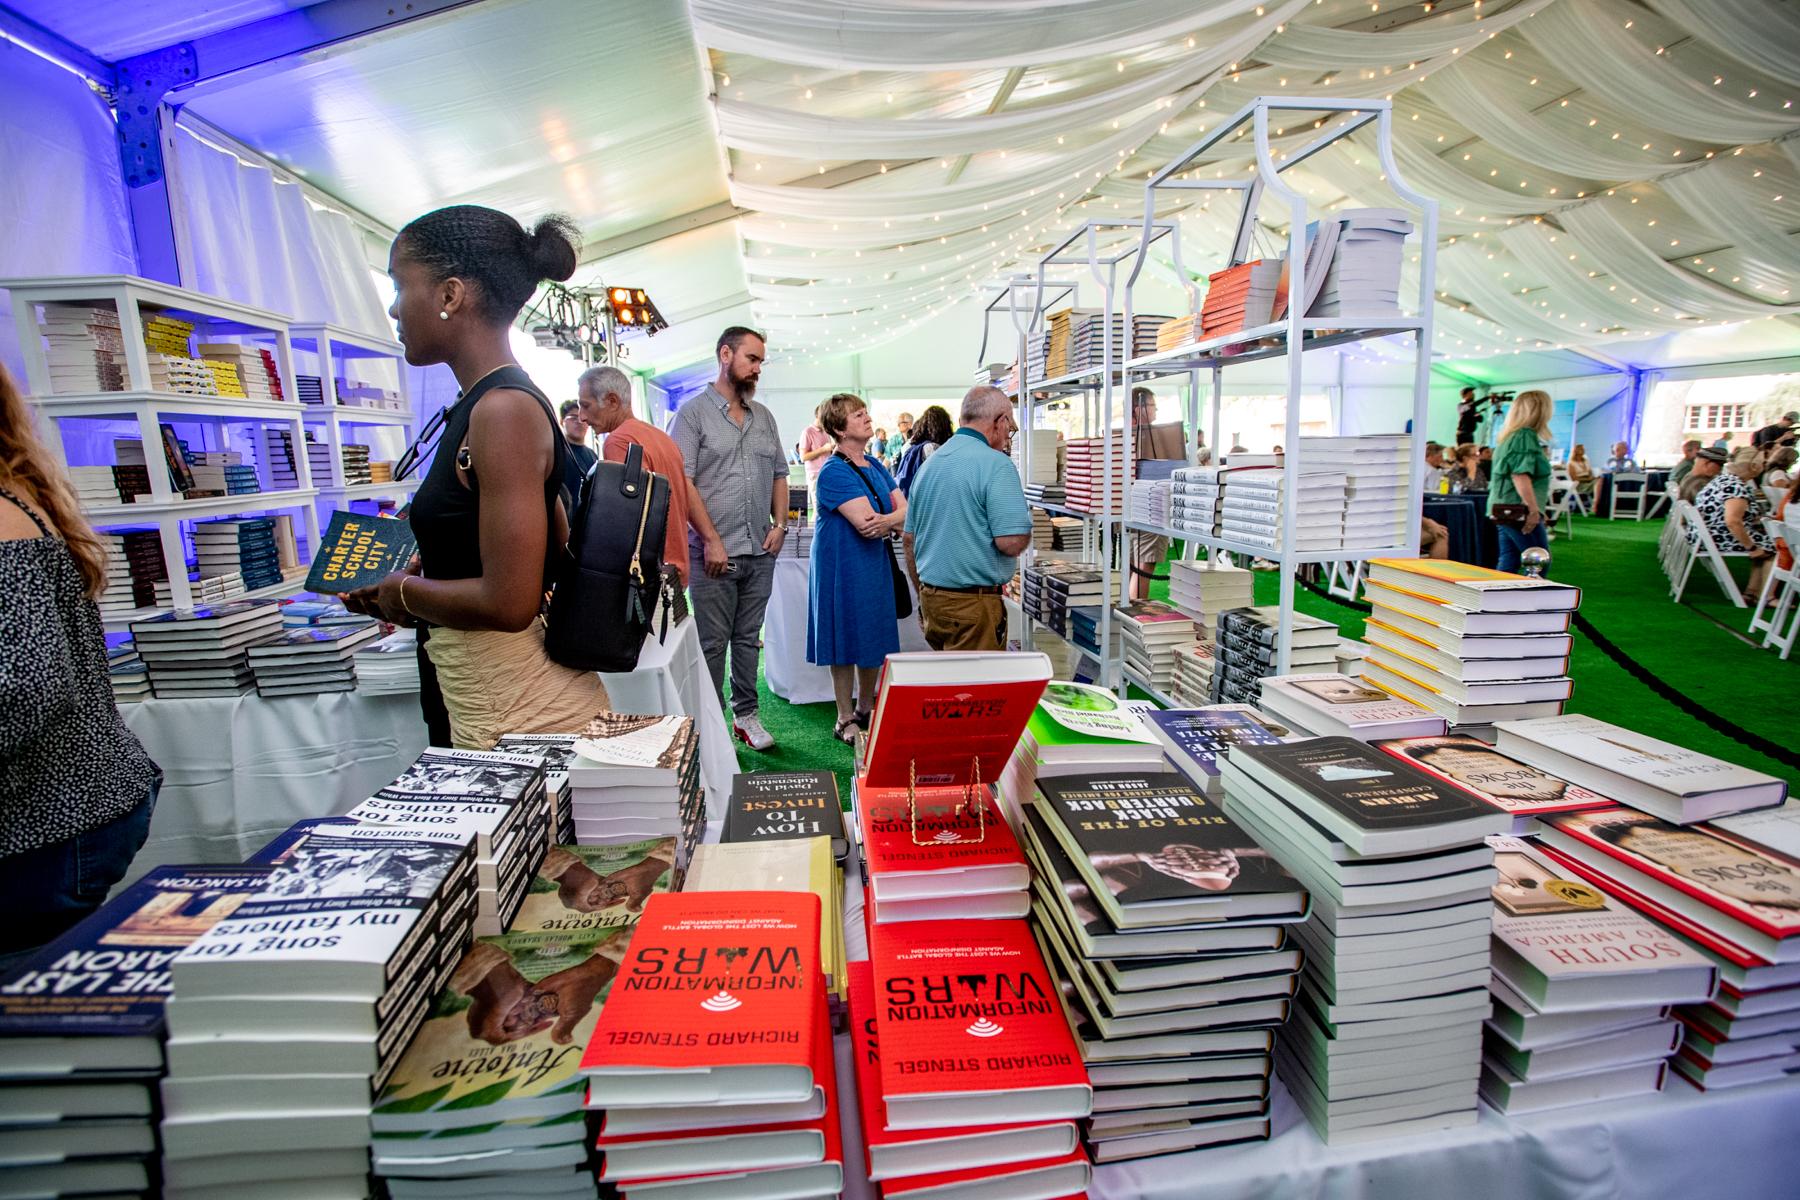 Attendees browse books for sale by featured Book Fesitval authors in between panels.